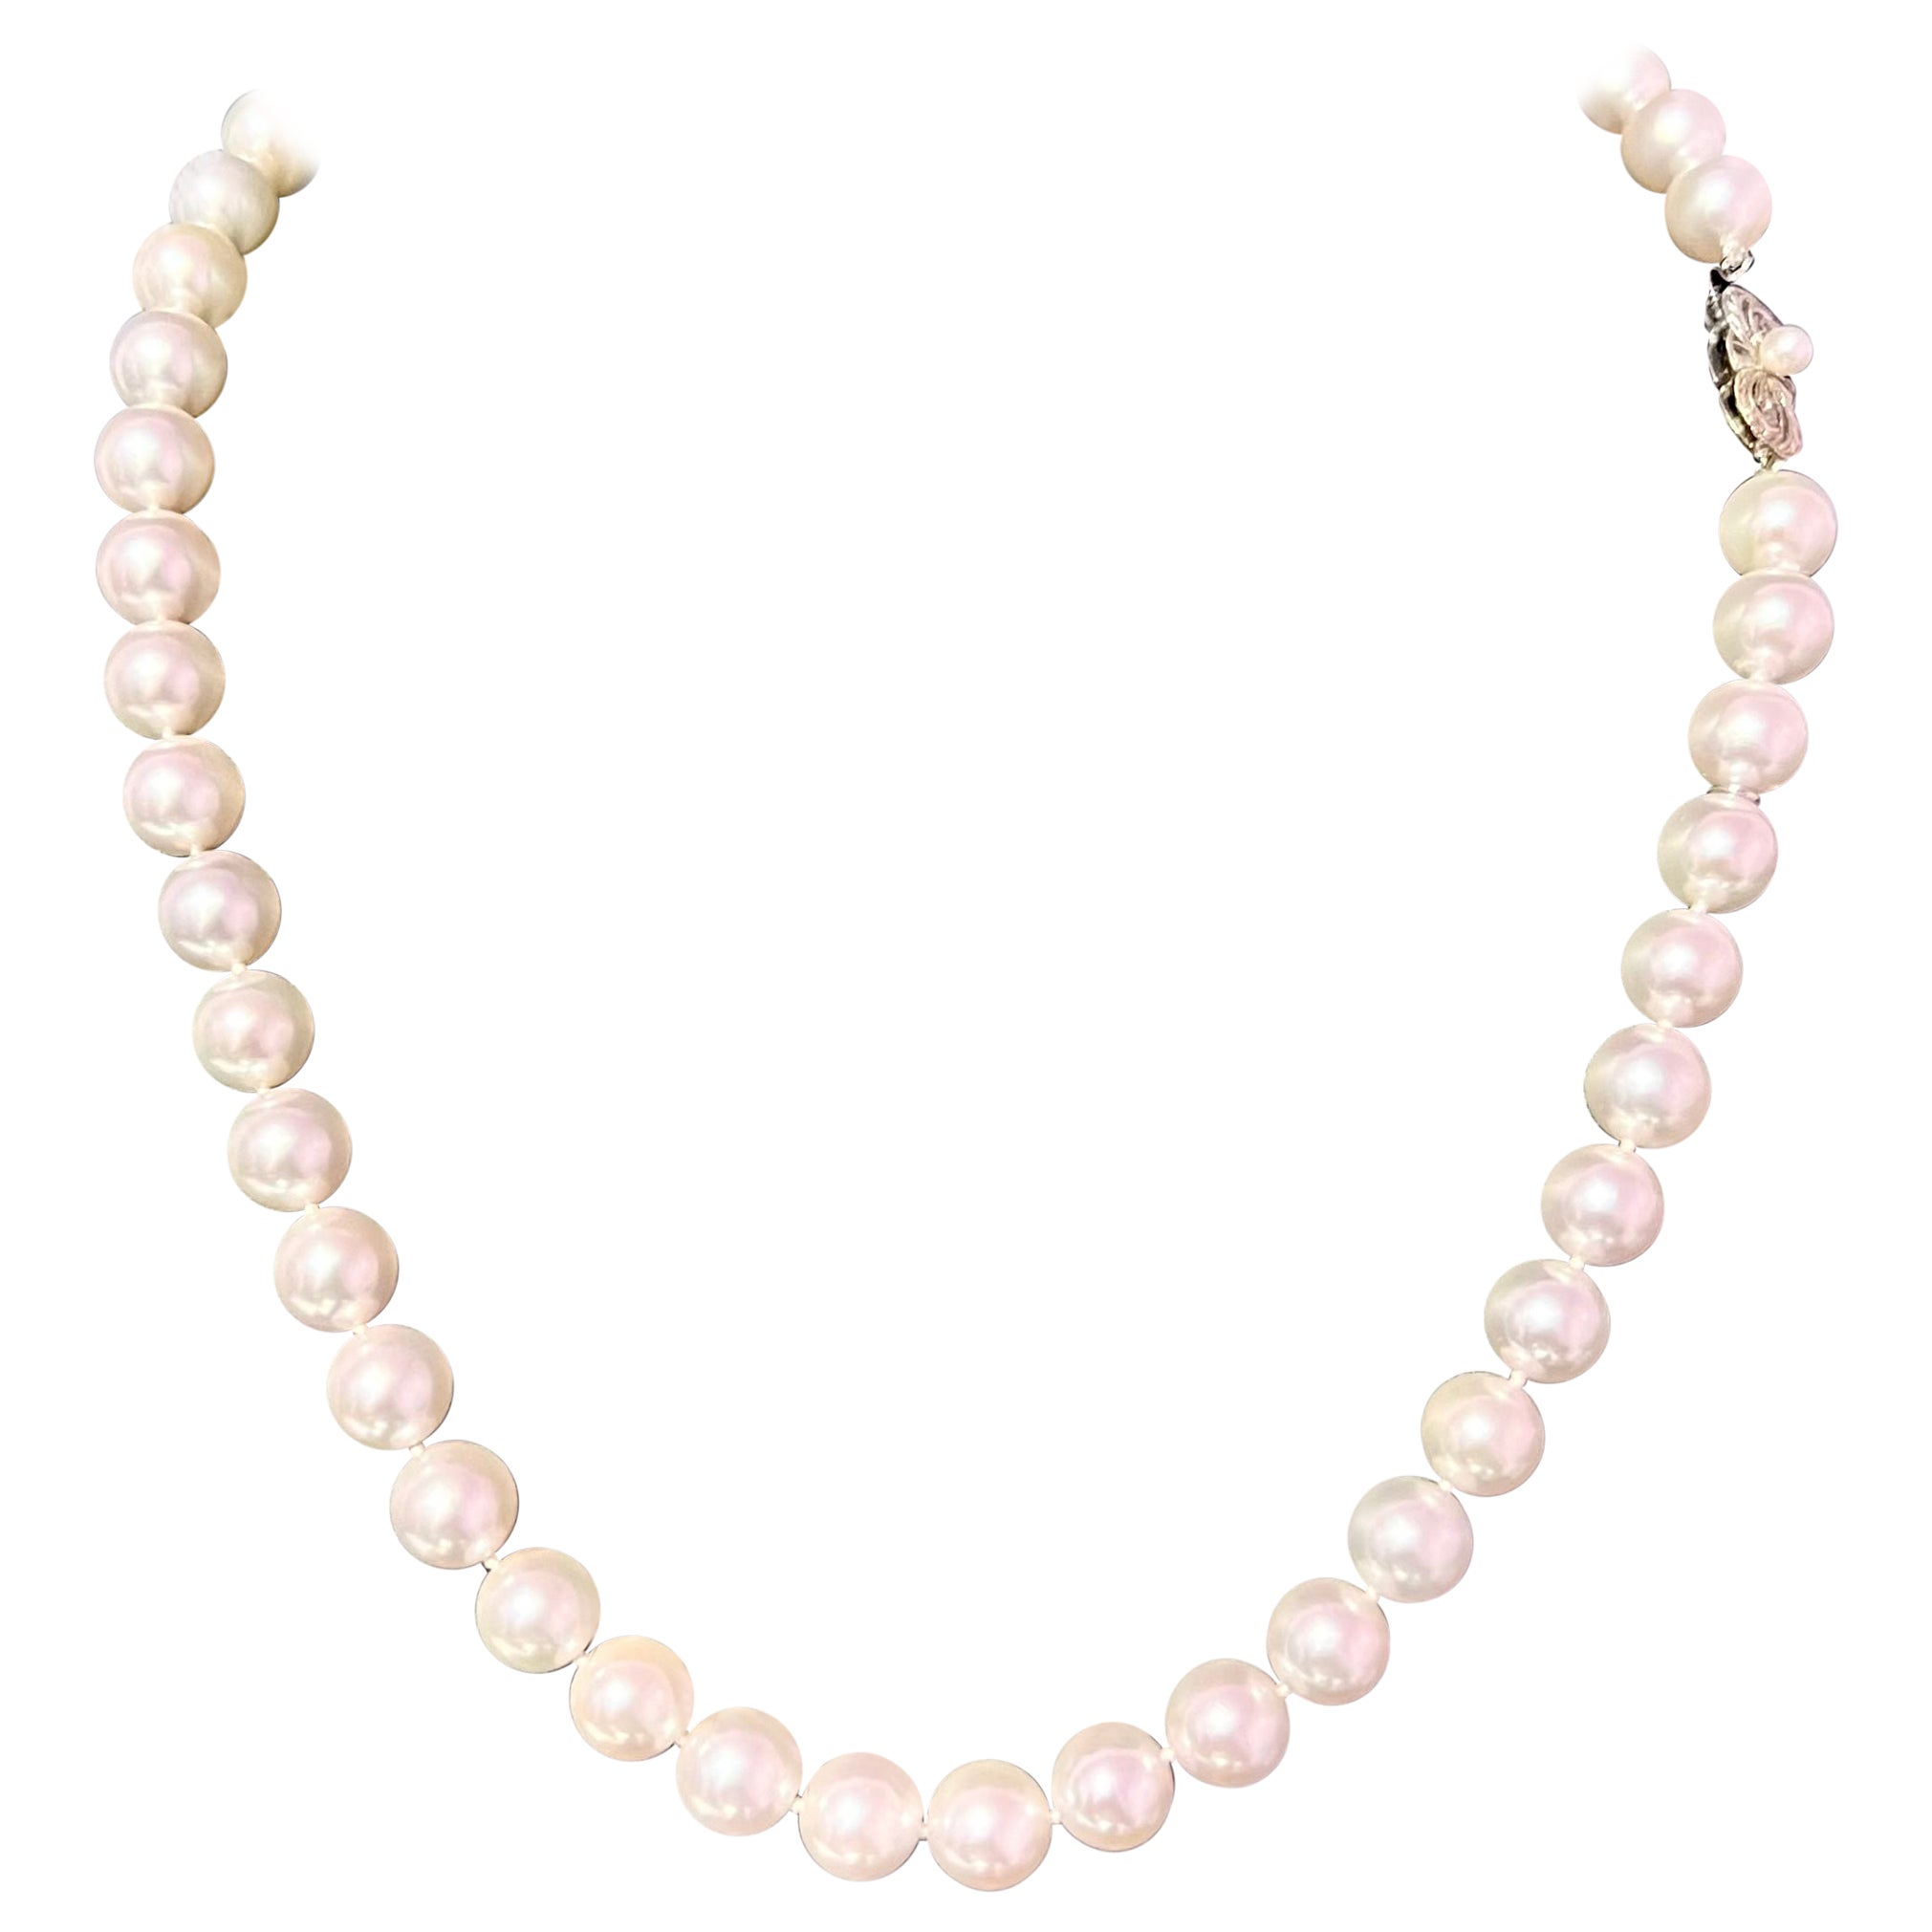 Mikimoto Estate Akoya Pearl Necklace 17.5" 18k W Gold 8.5 mm Certified 